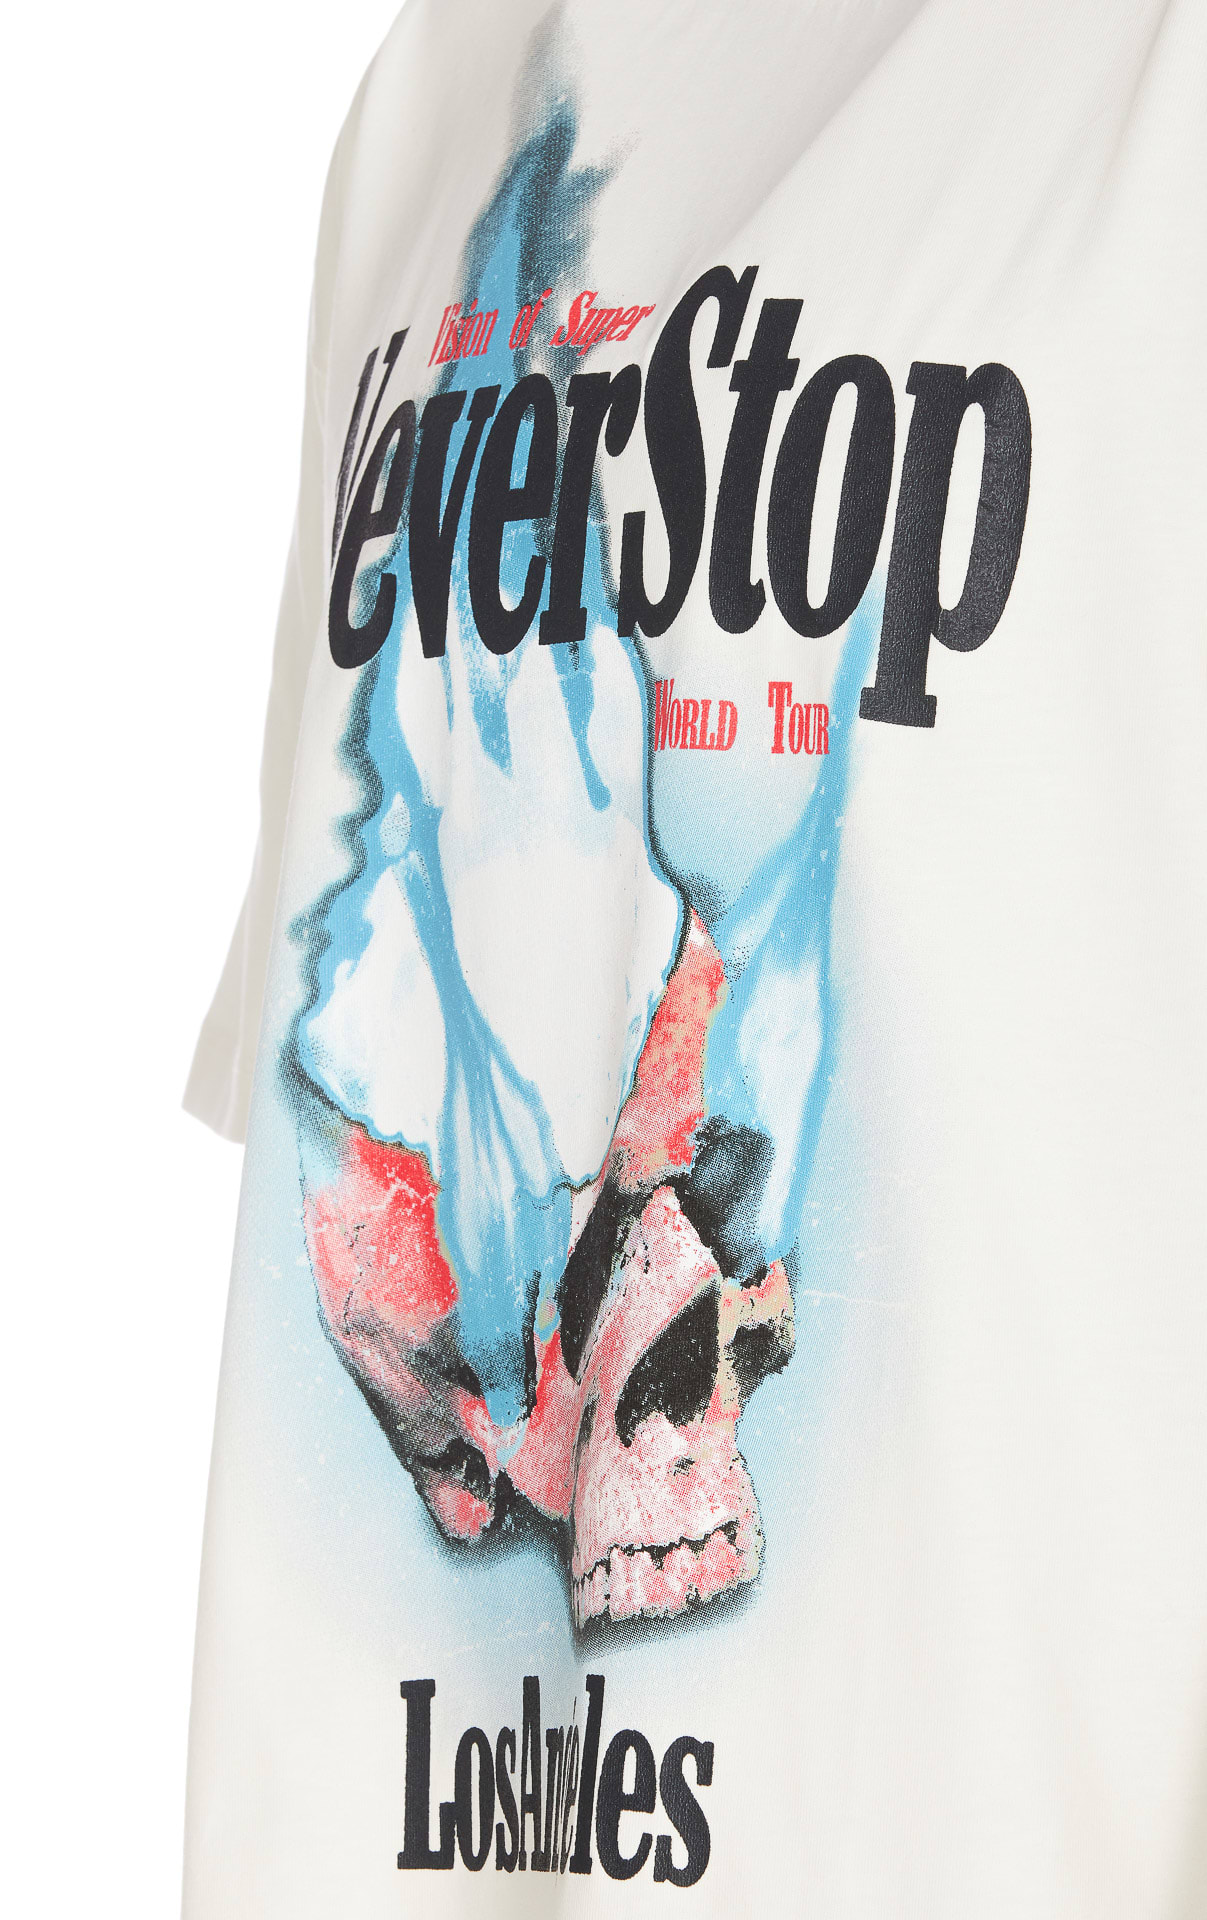 Shop Vision Of Super Never Stop Print T-shirt In White